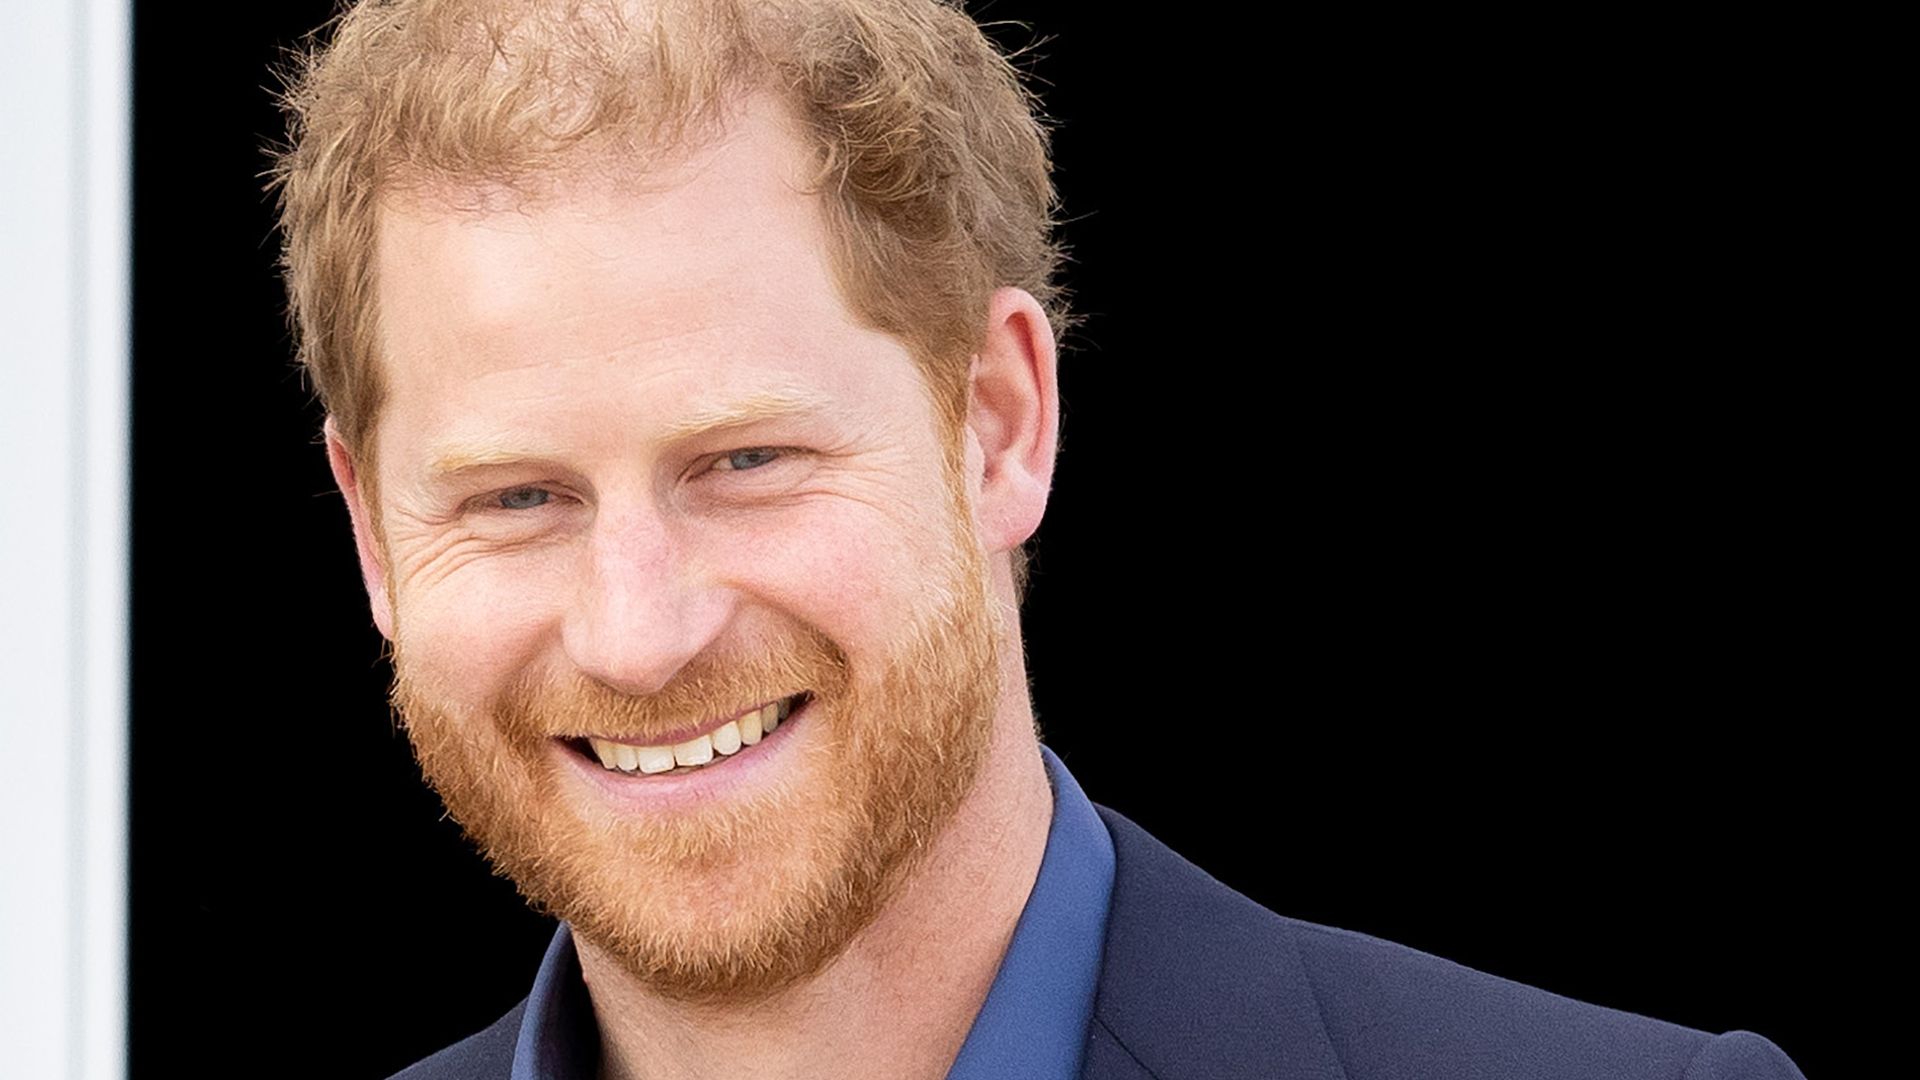 Prince Harry's special celebration one day after King Charles' birthday parade